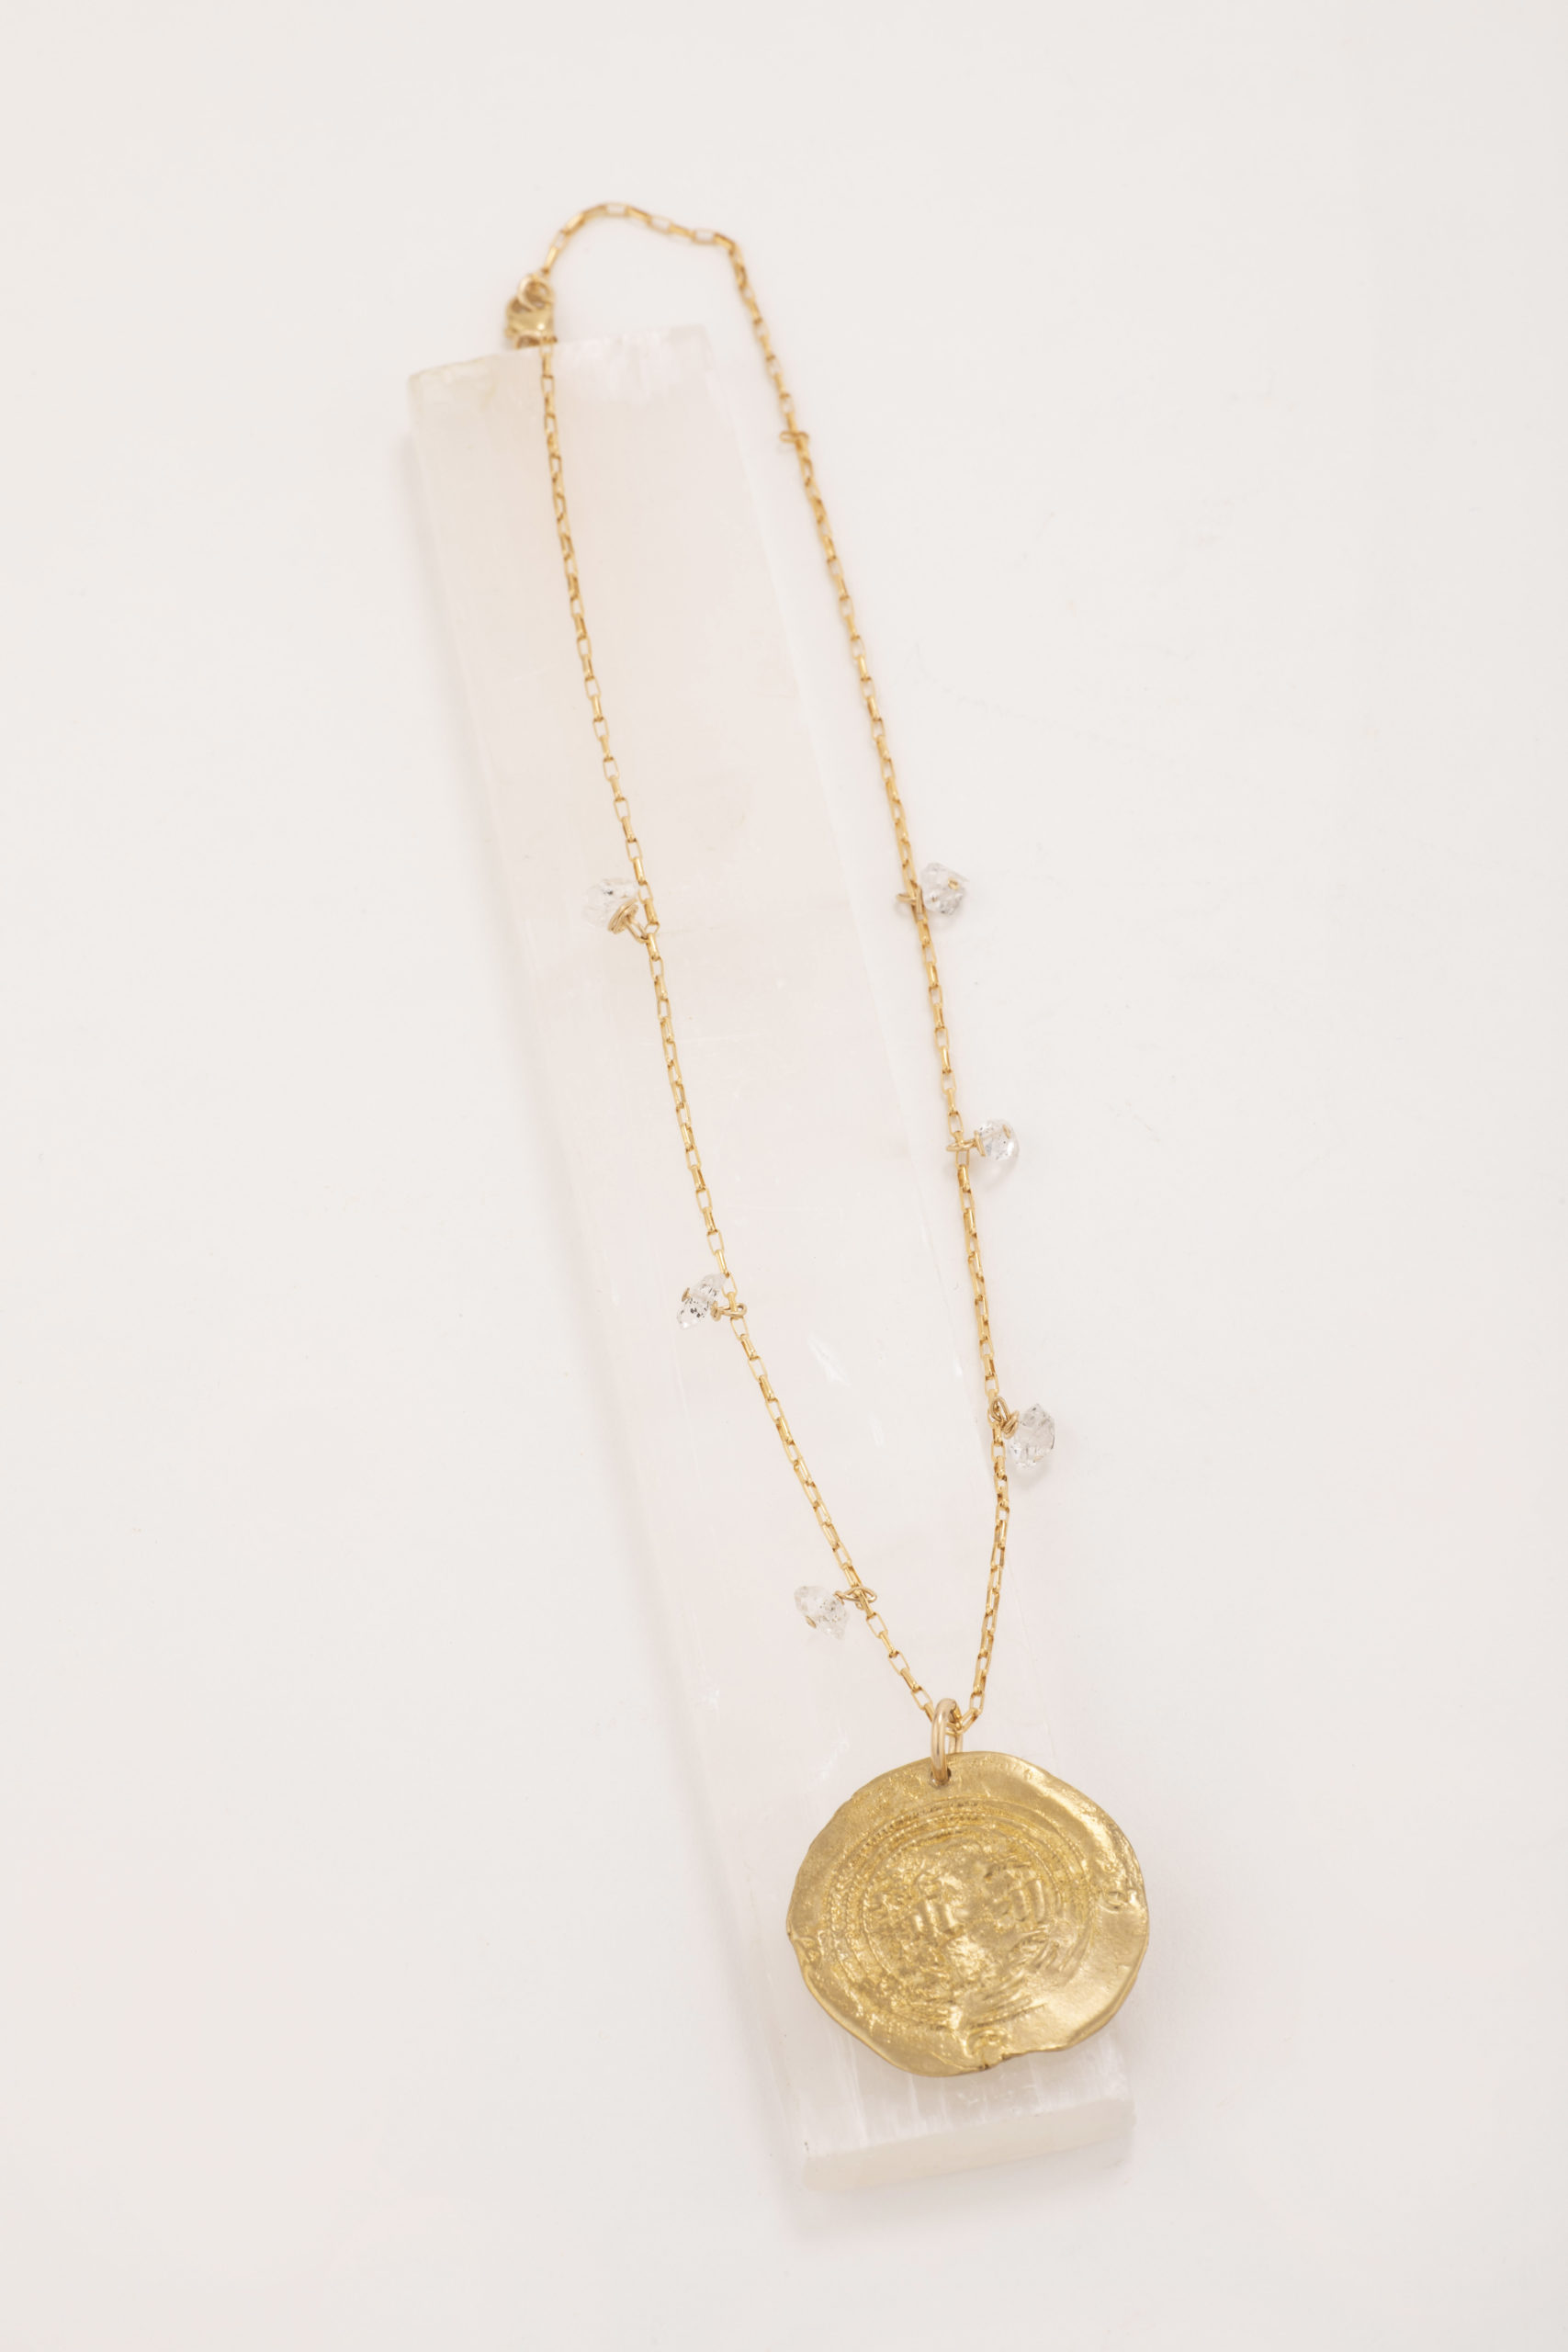 Featured image for “Kai Gold Necklace”